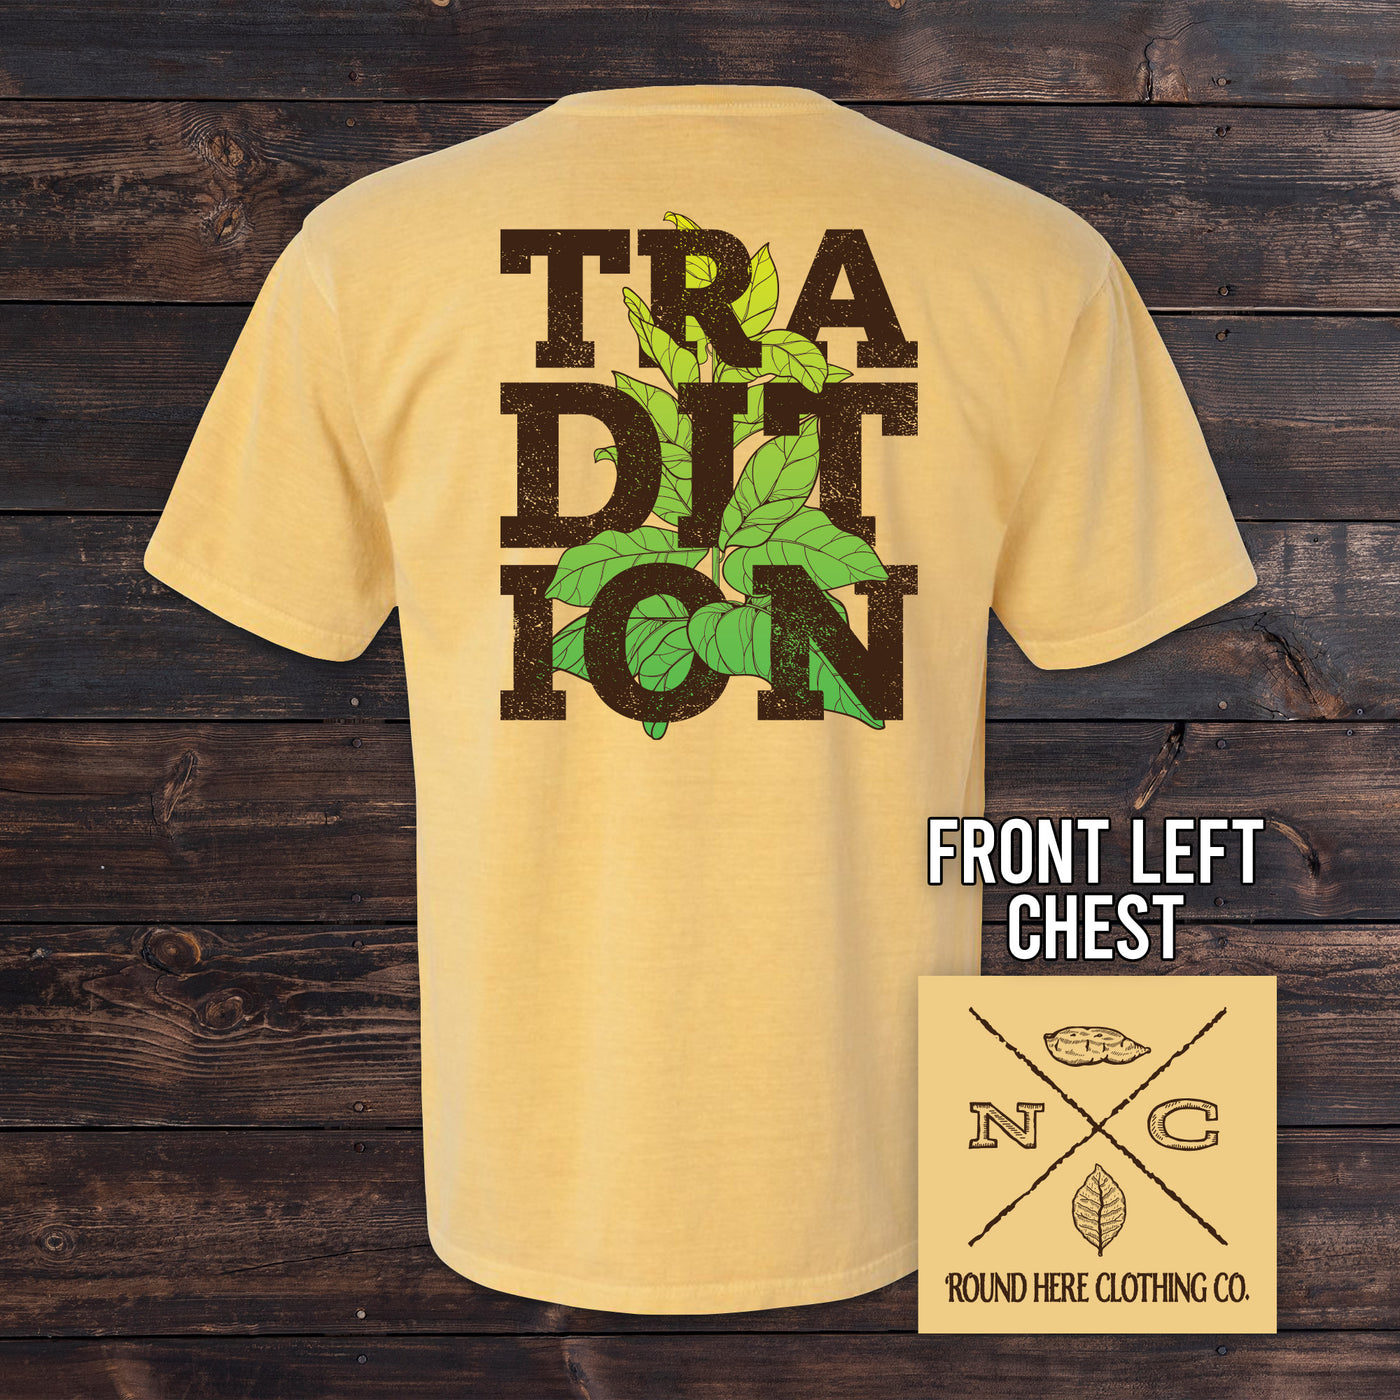 'Round Here Clothing Tobacco Tradition